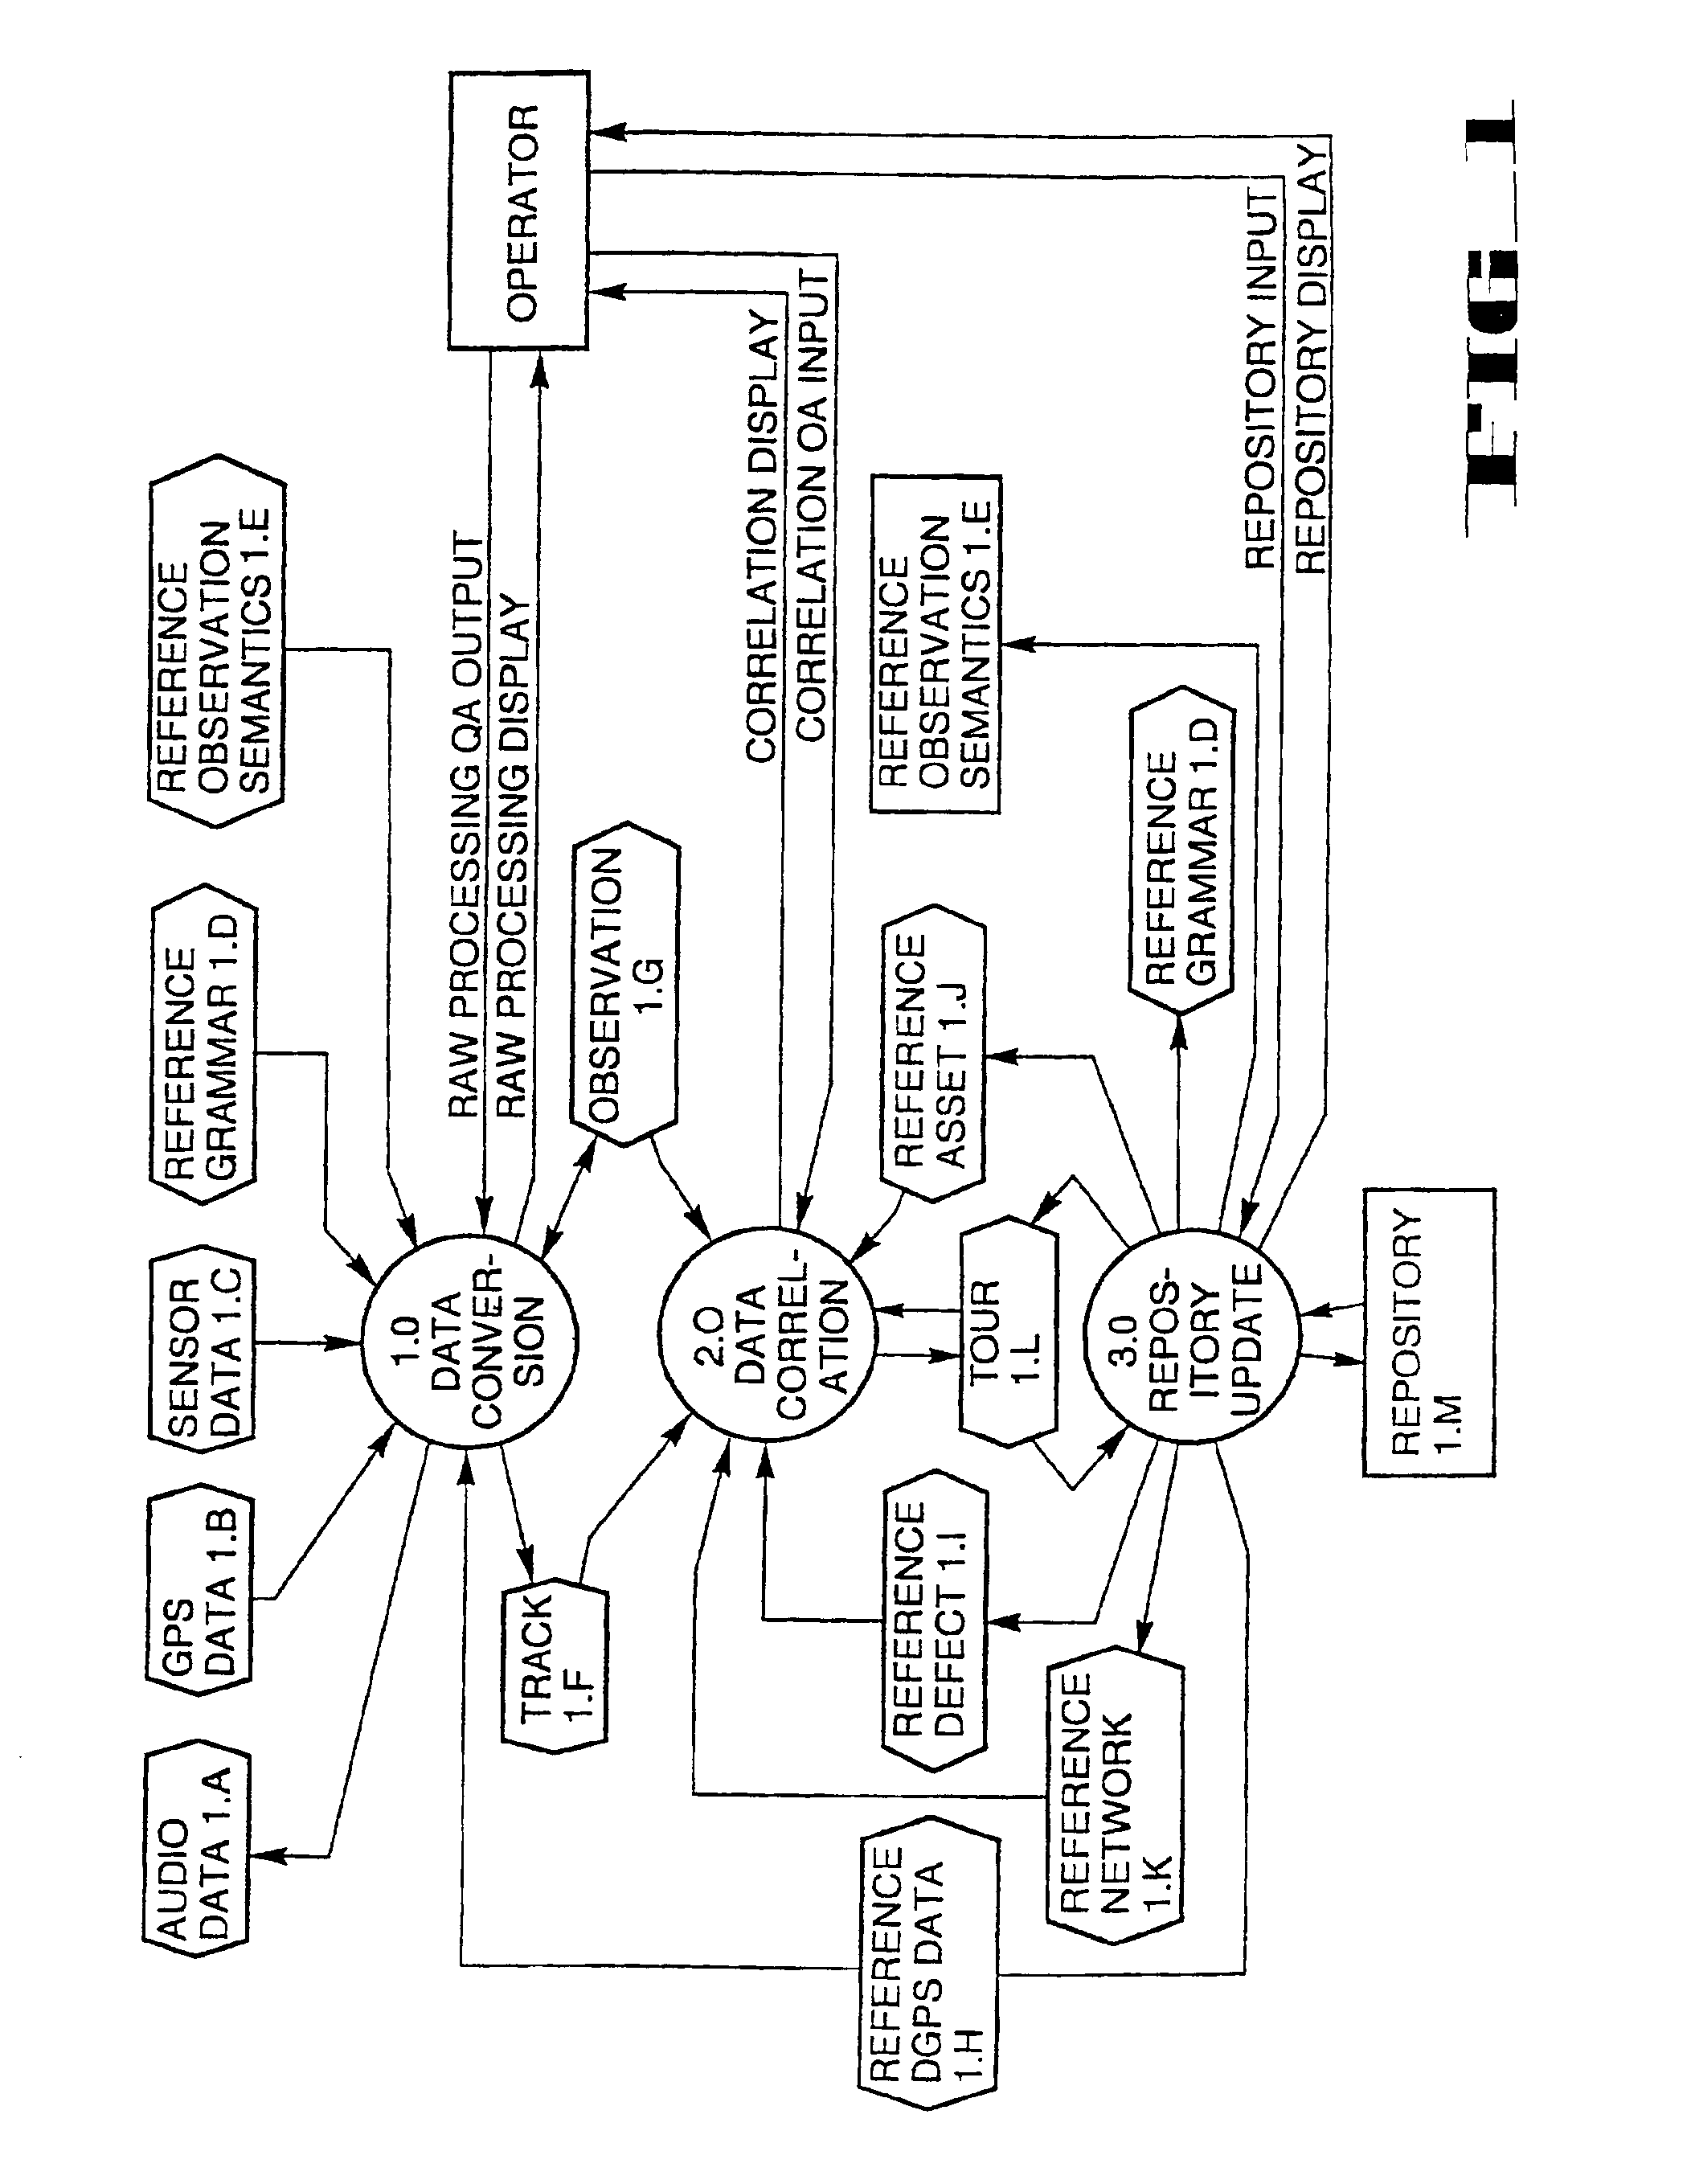 Spatial asset management system and method